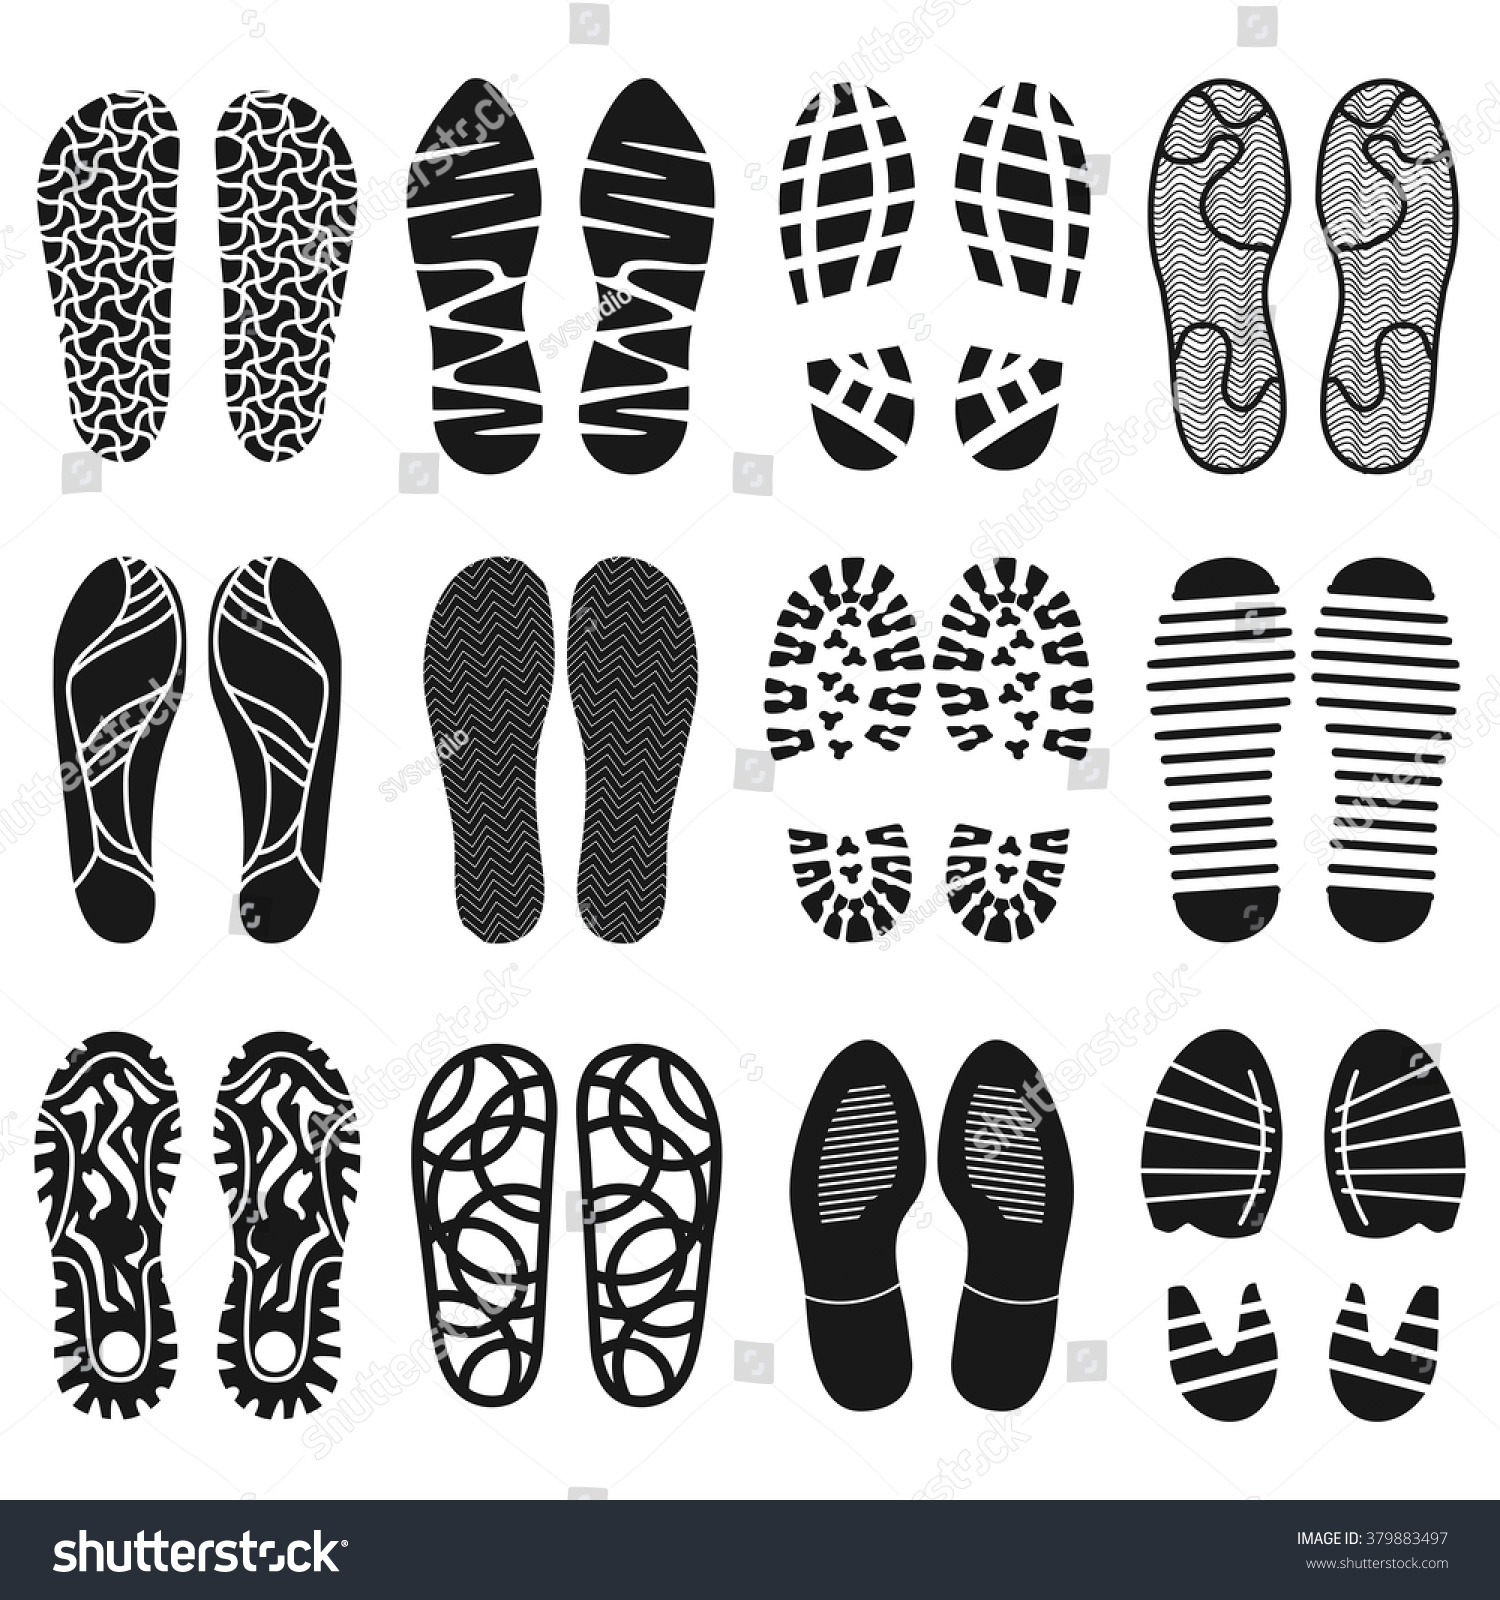 The Collection Of A Shoeprints. Shoes Silhouette Black And White Icons ...